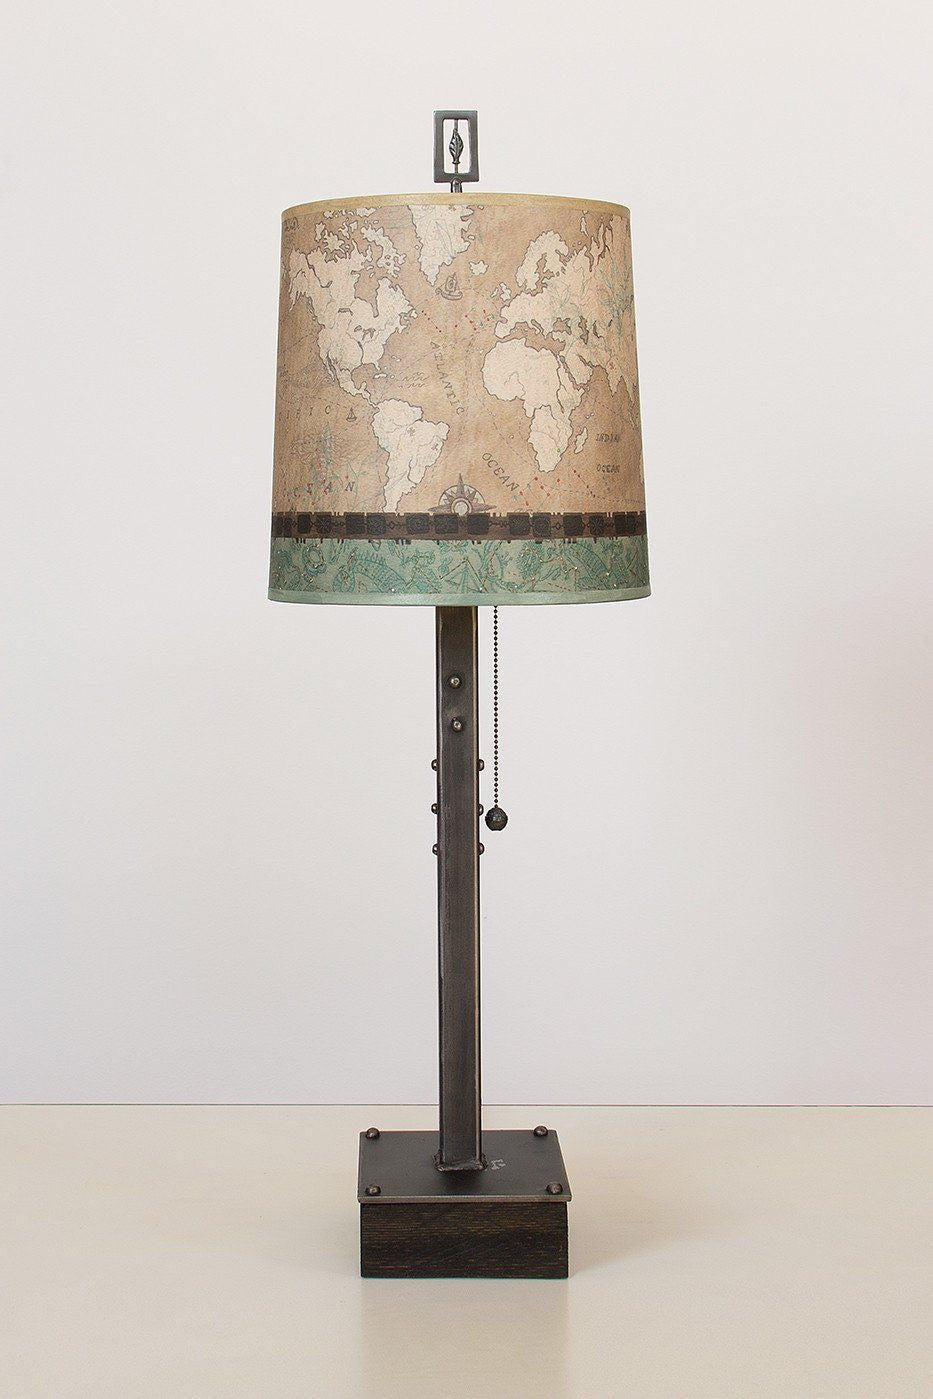 Steel Table Lamp on Wood with Medium Drum Shade in Voyages